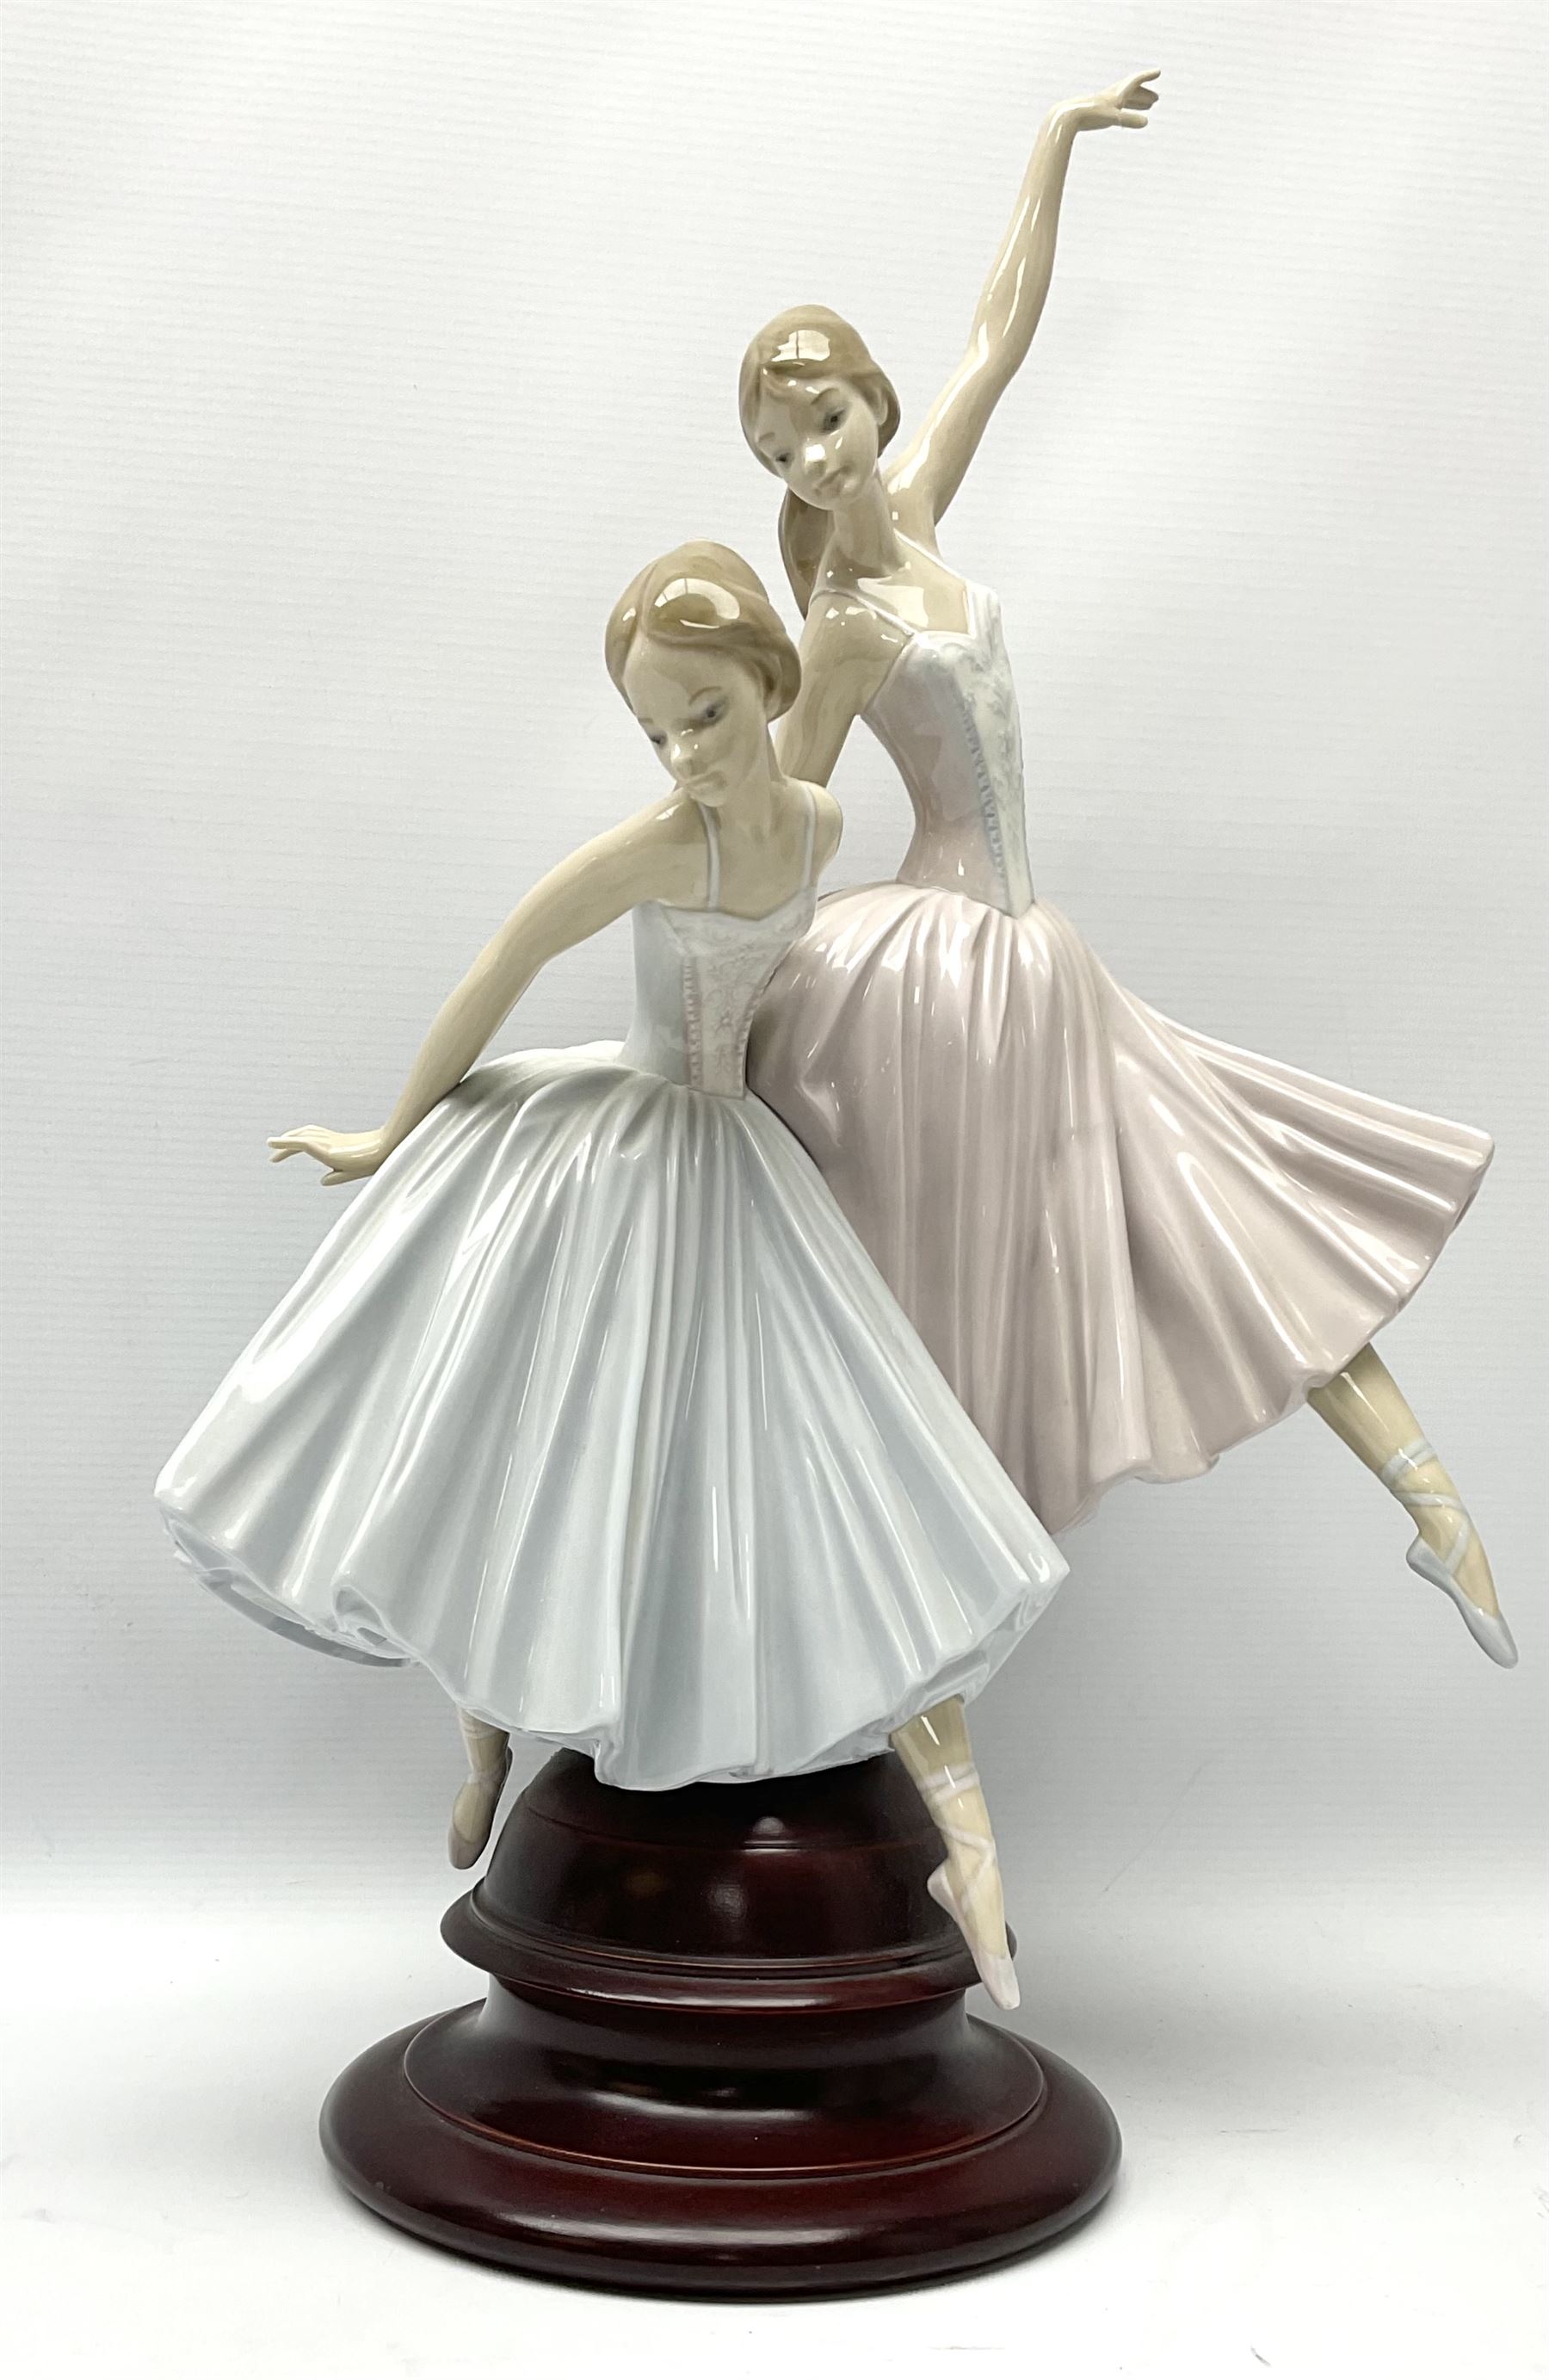 Lladro figure group, 'Merry Ballet', modelled as two ballerinas in